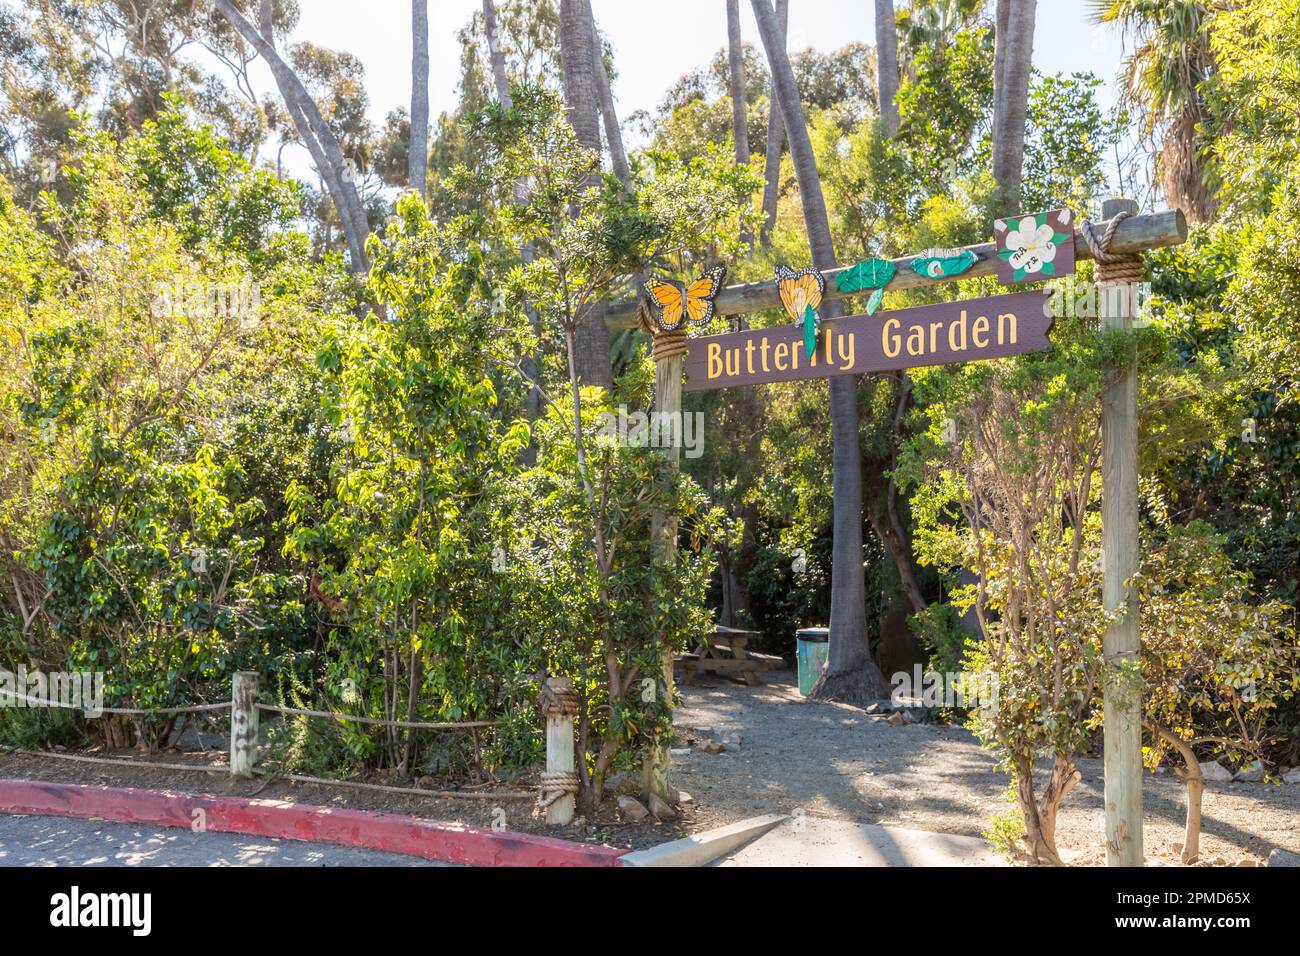 Doheny state Beach Butterfly Garden segnaletica ed entrata Foto Stock